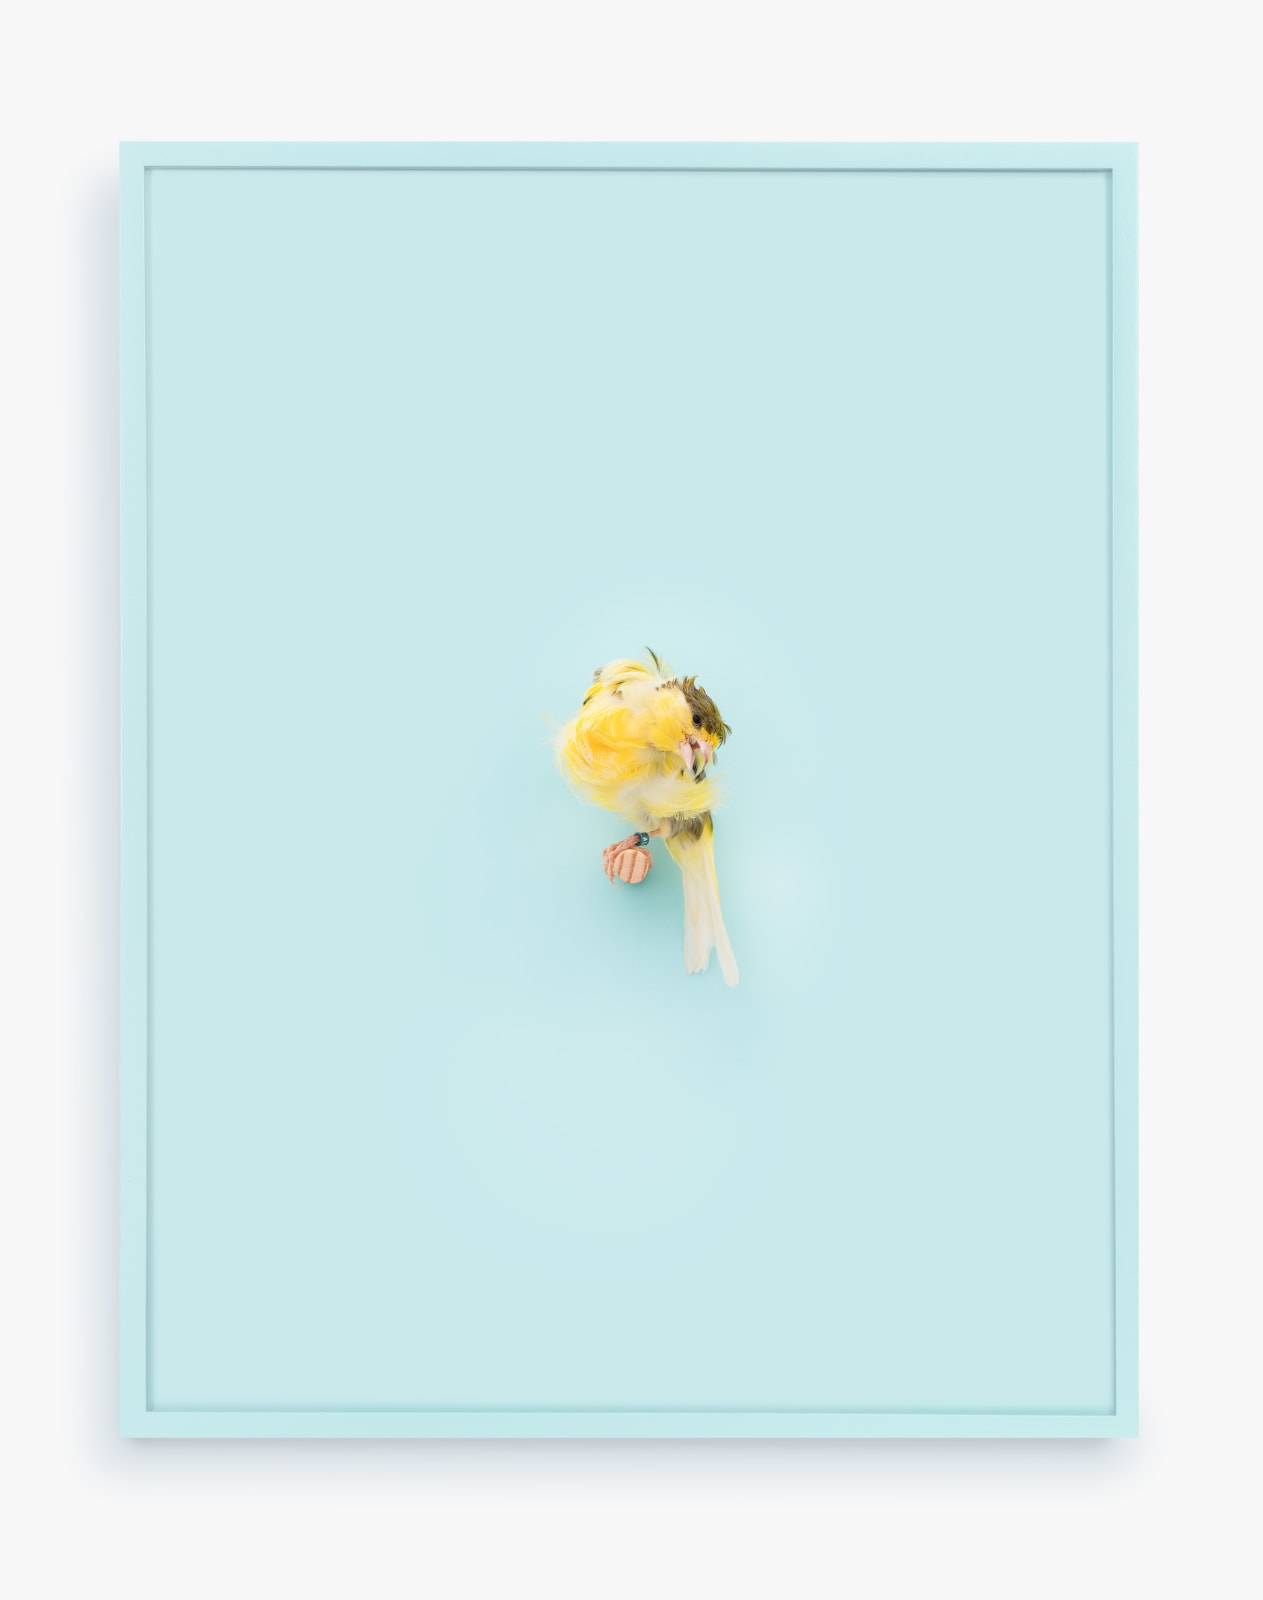 Portrait of a yellow canary in front of a baby blue wall